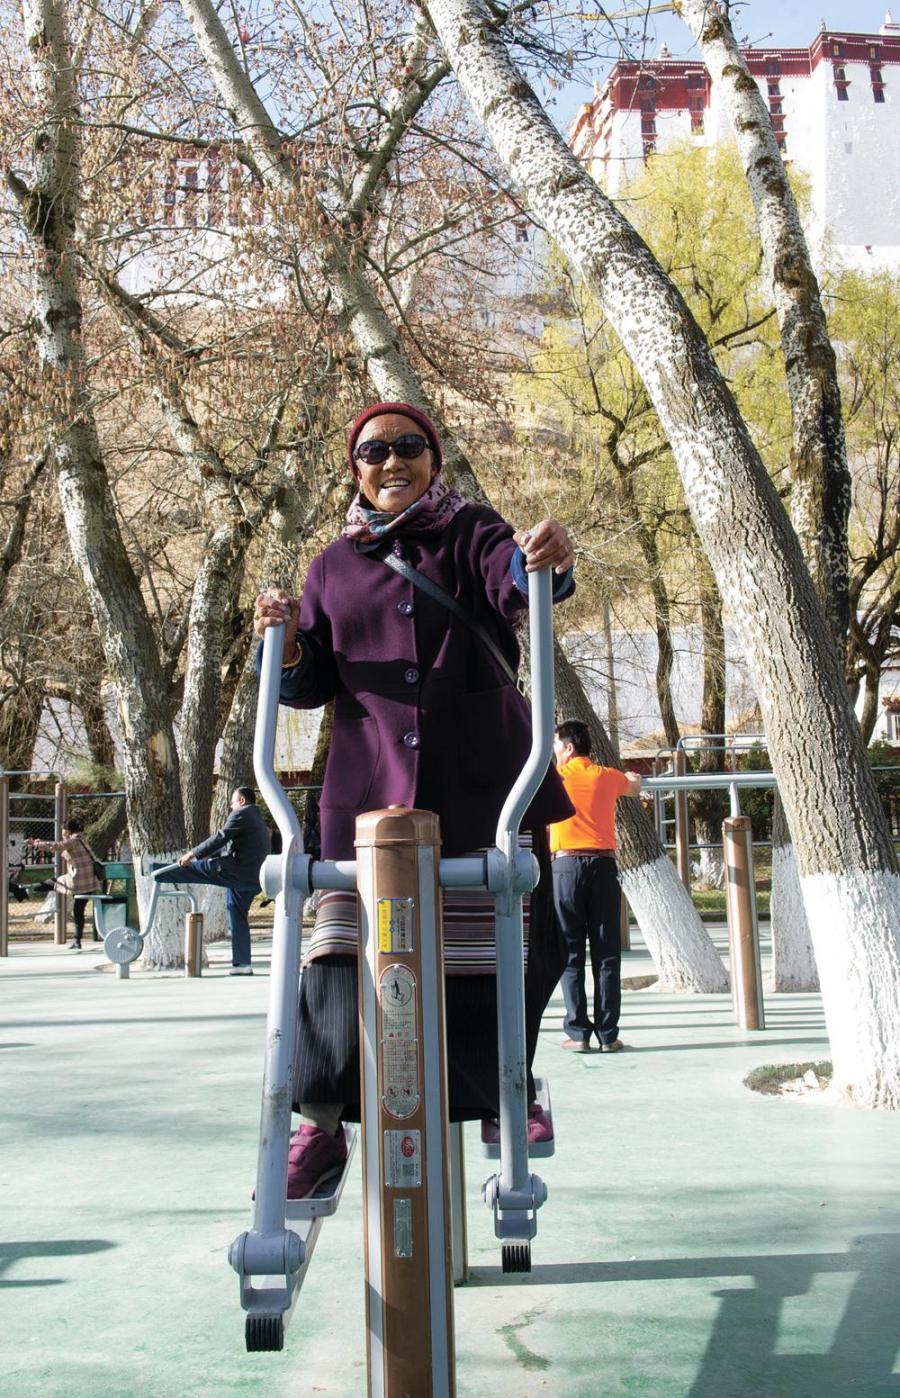 With spring rapidly approaching, signs of the natural world emerging from a winter slumber are spreading all over Dzongyab Lukhang Park. Photo shows the elderly woman is doing exercise at the Dzongyab Lukhang Park on a spring morning. [China Tibet News/Lu Wenming]